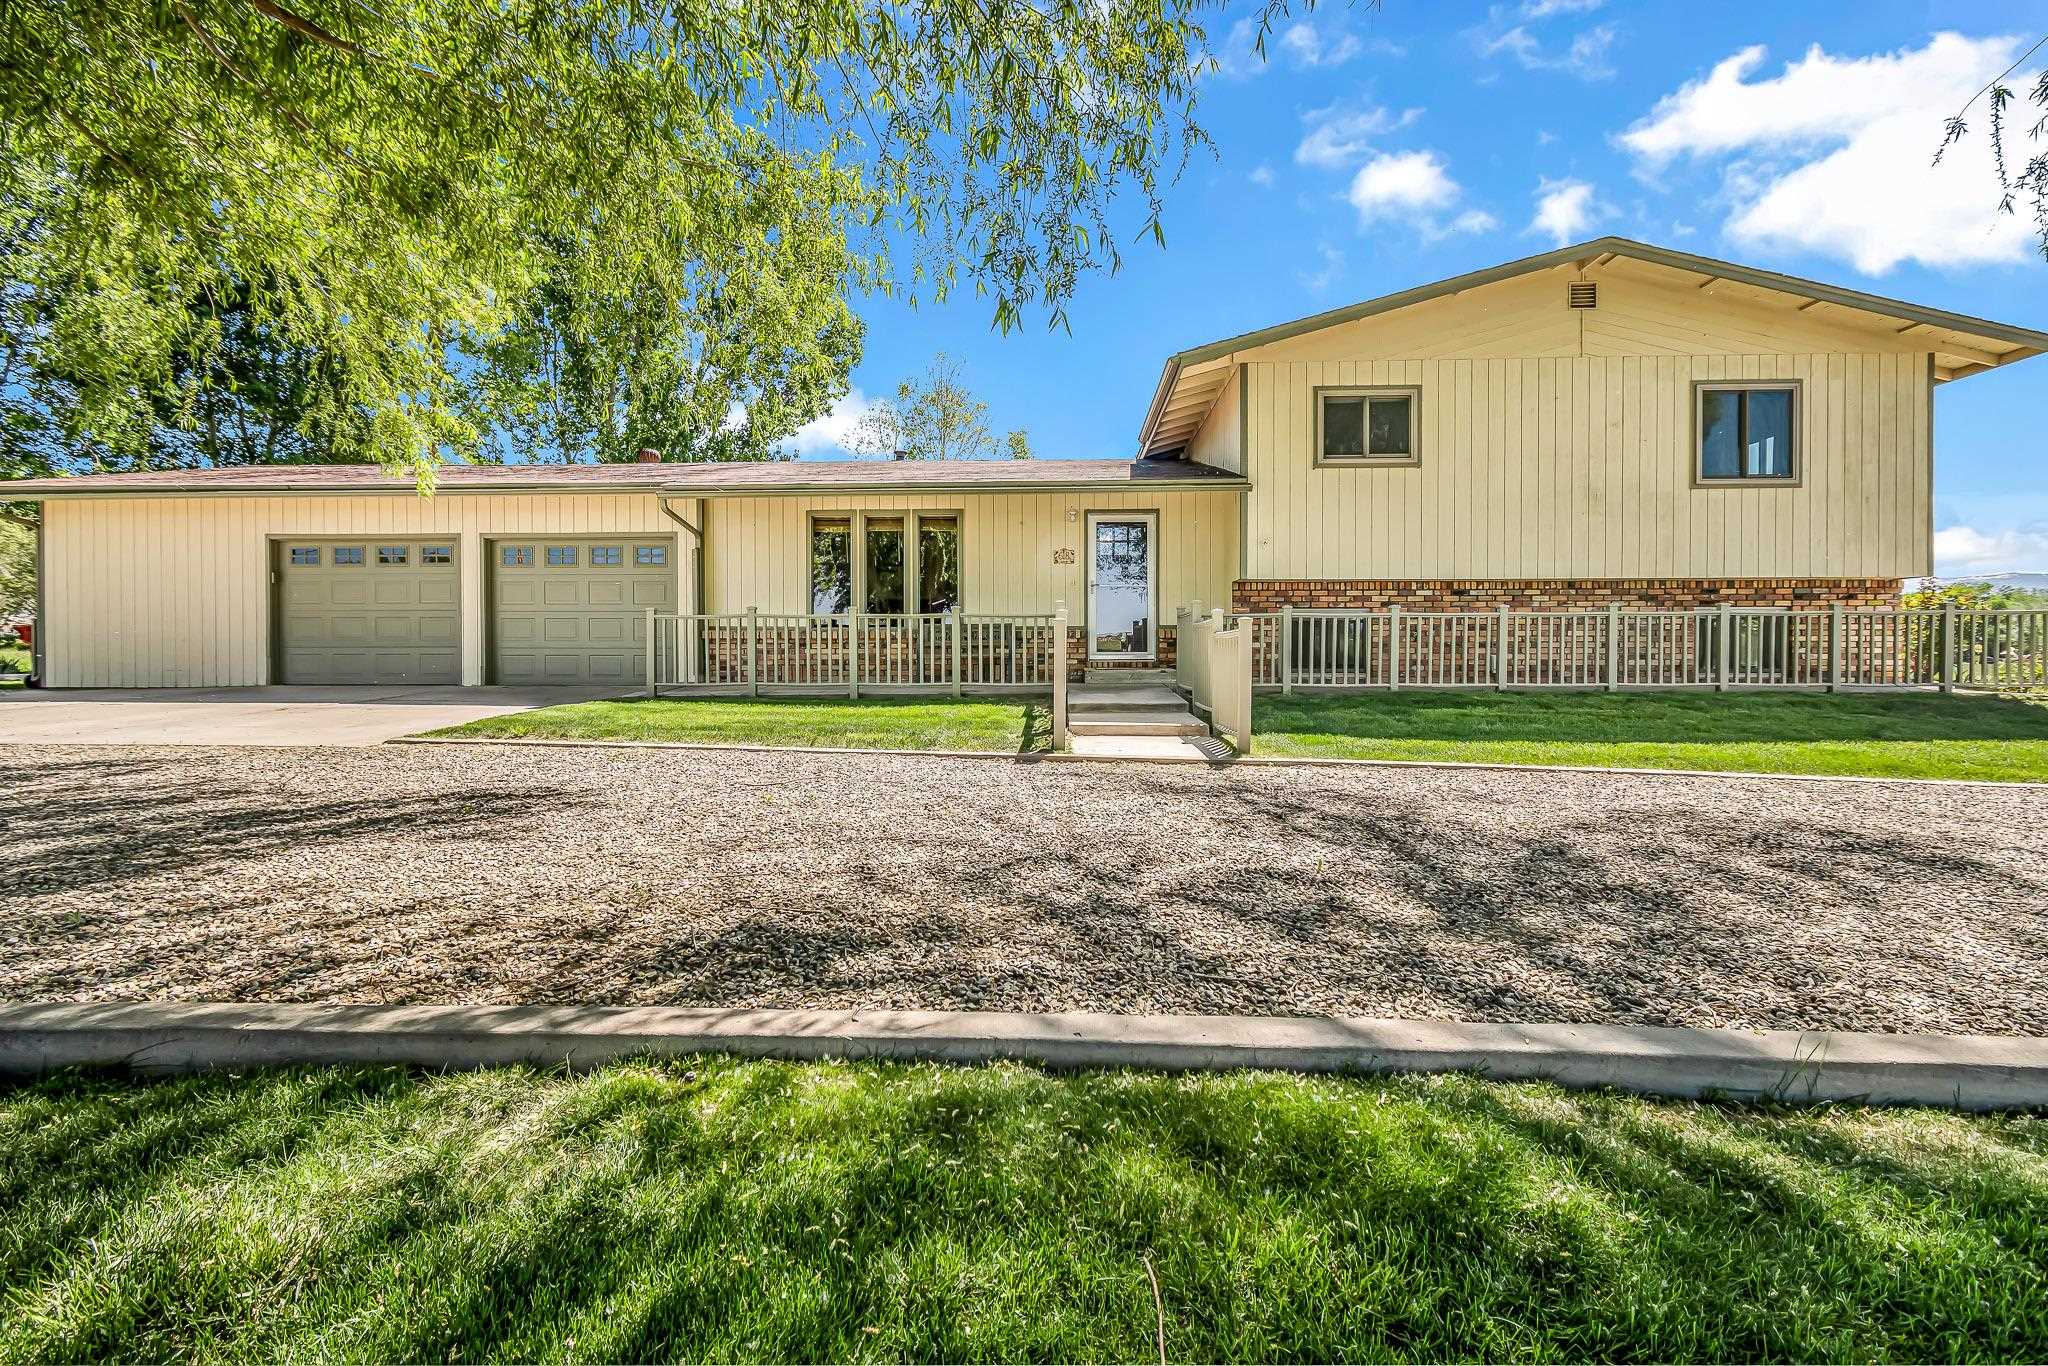 618 34 1/2 Road, Clifton, CO 